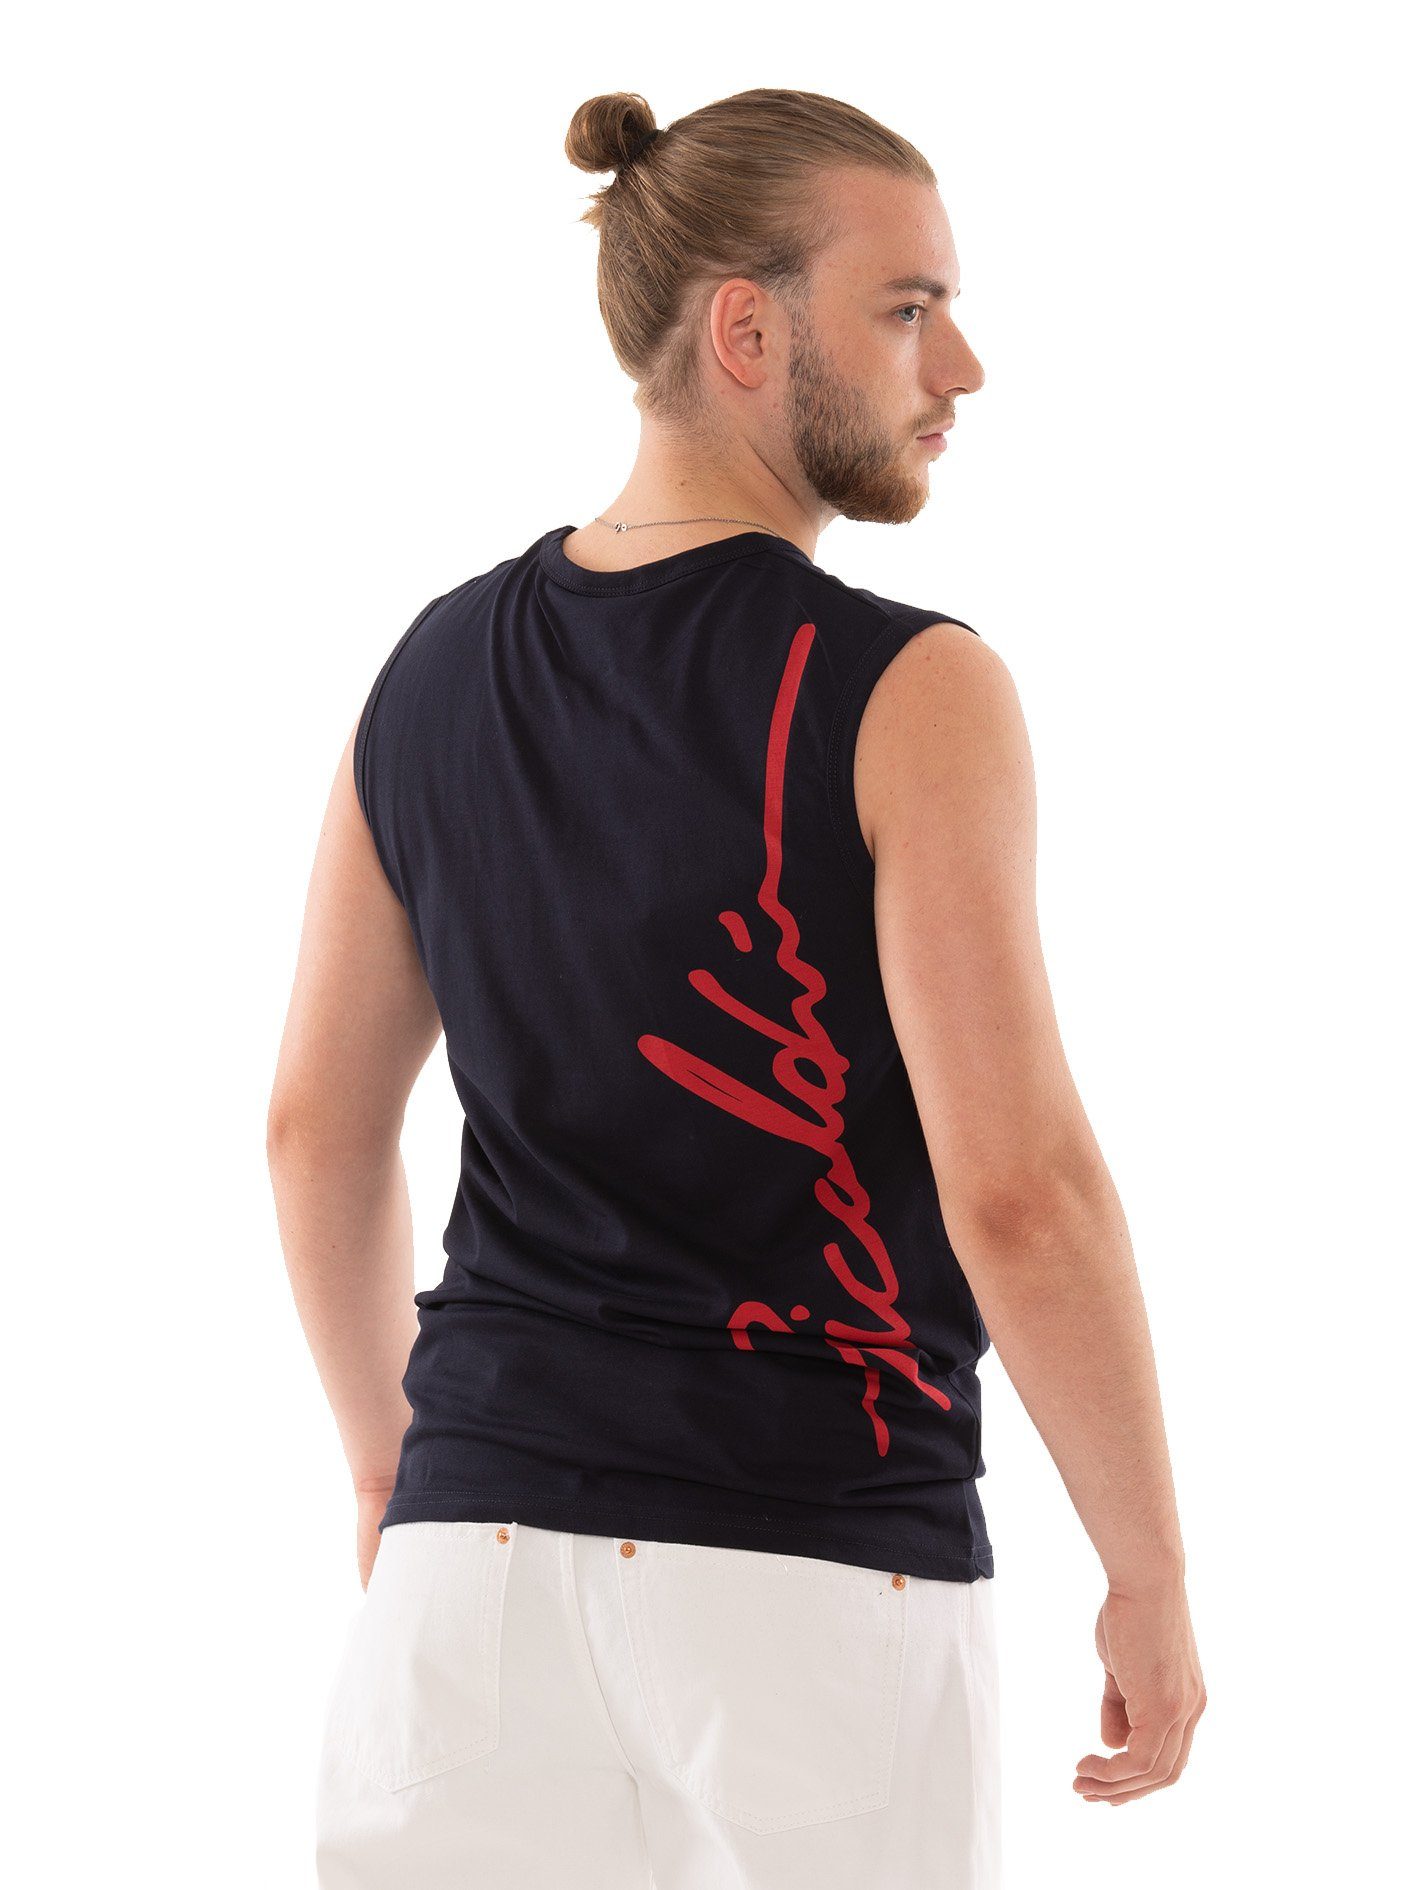 PICALDI Jeans Muskelshirt Tank Blue Top Male Sommermode, Streetwear Navy